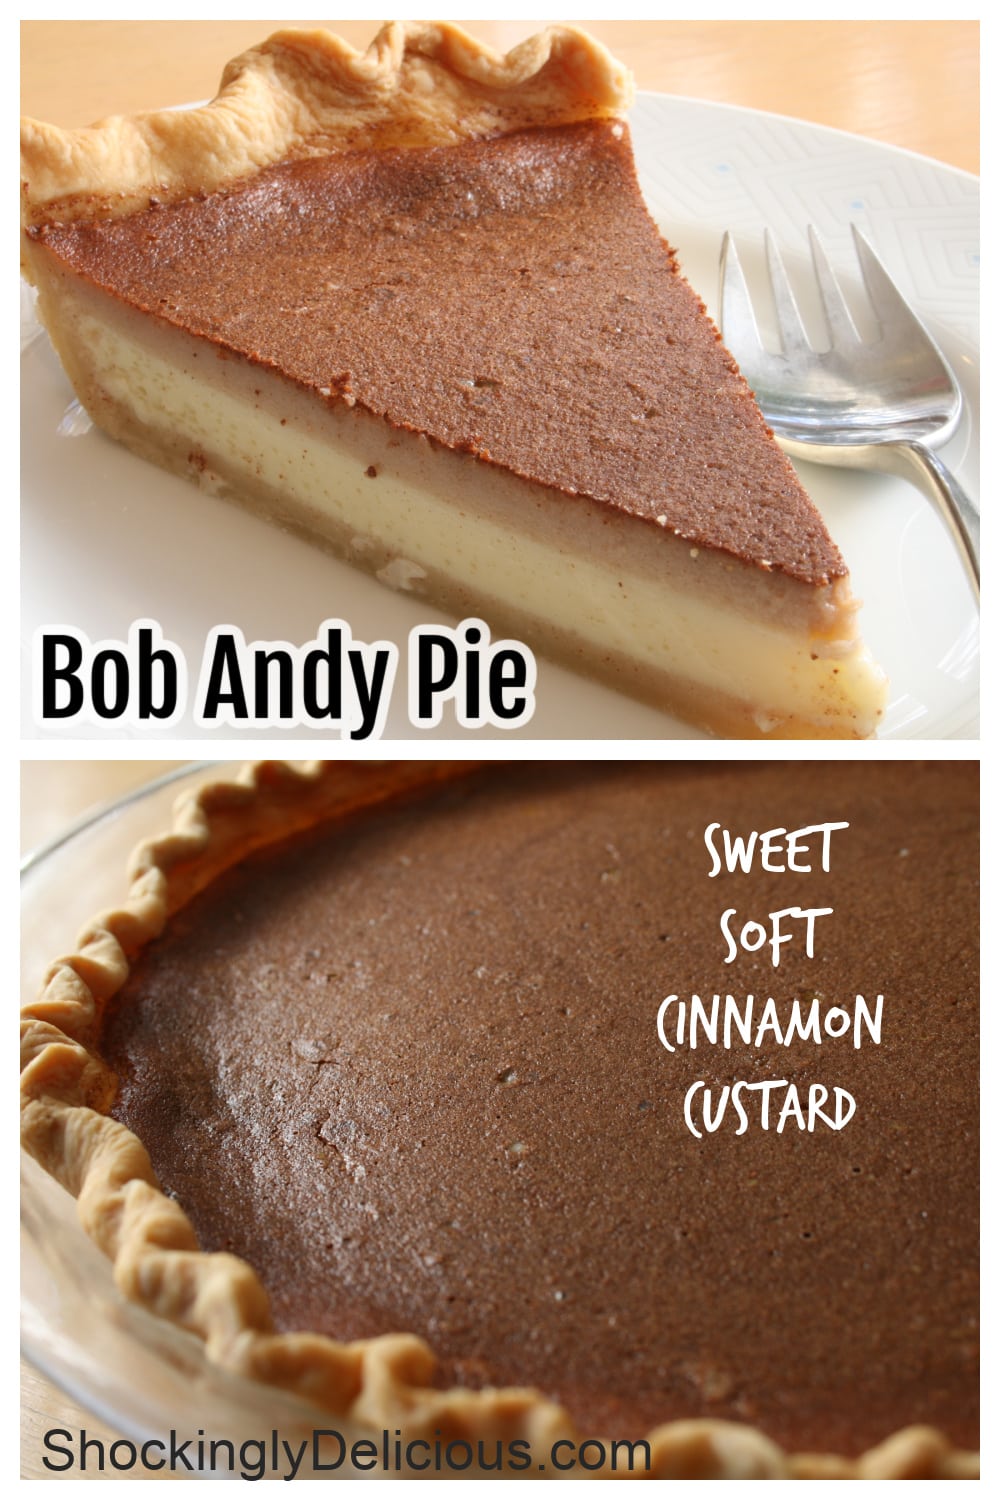 Photo collage of Bob Andy Pie. Top photo is wedge of cinnamon layered pie on a white plate with a fork alongside; bottom photo shows brown top of the whole pie